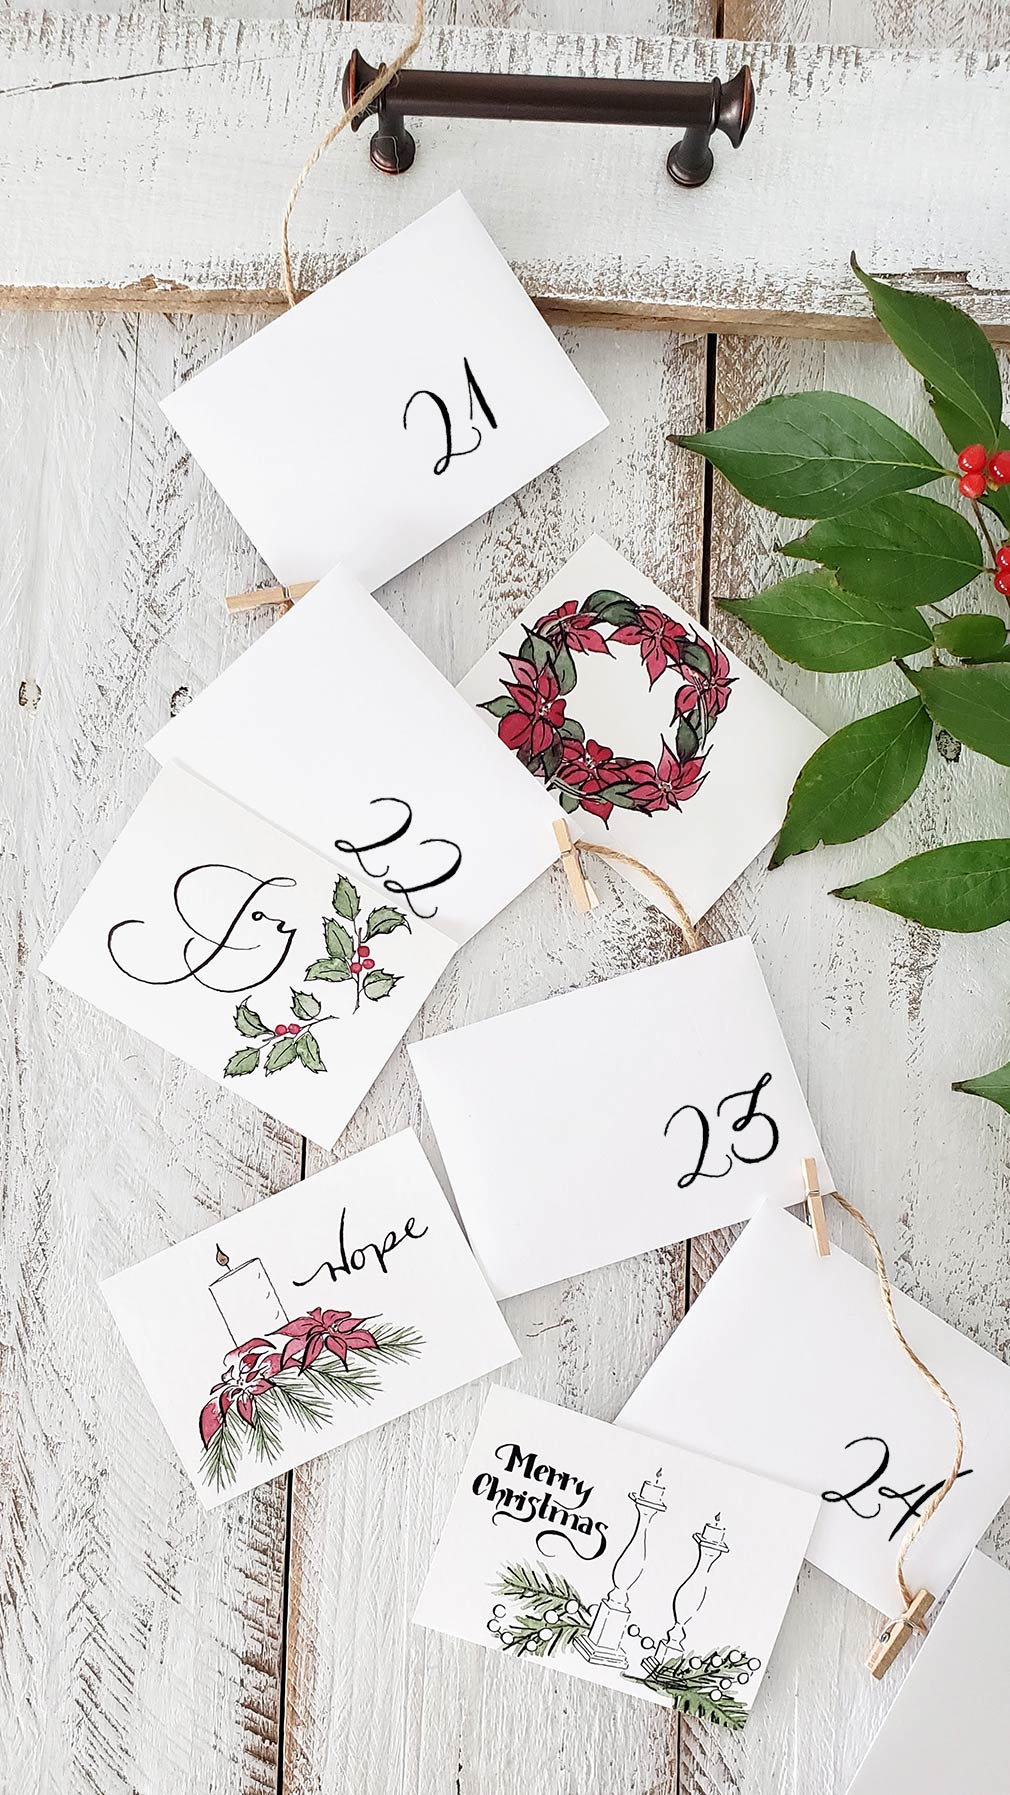 Mini Cards for a Countdown to Christmas - The Painted Pen